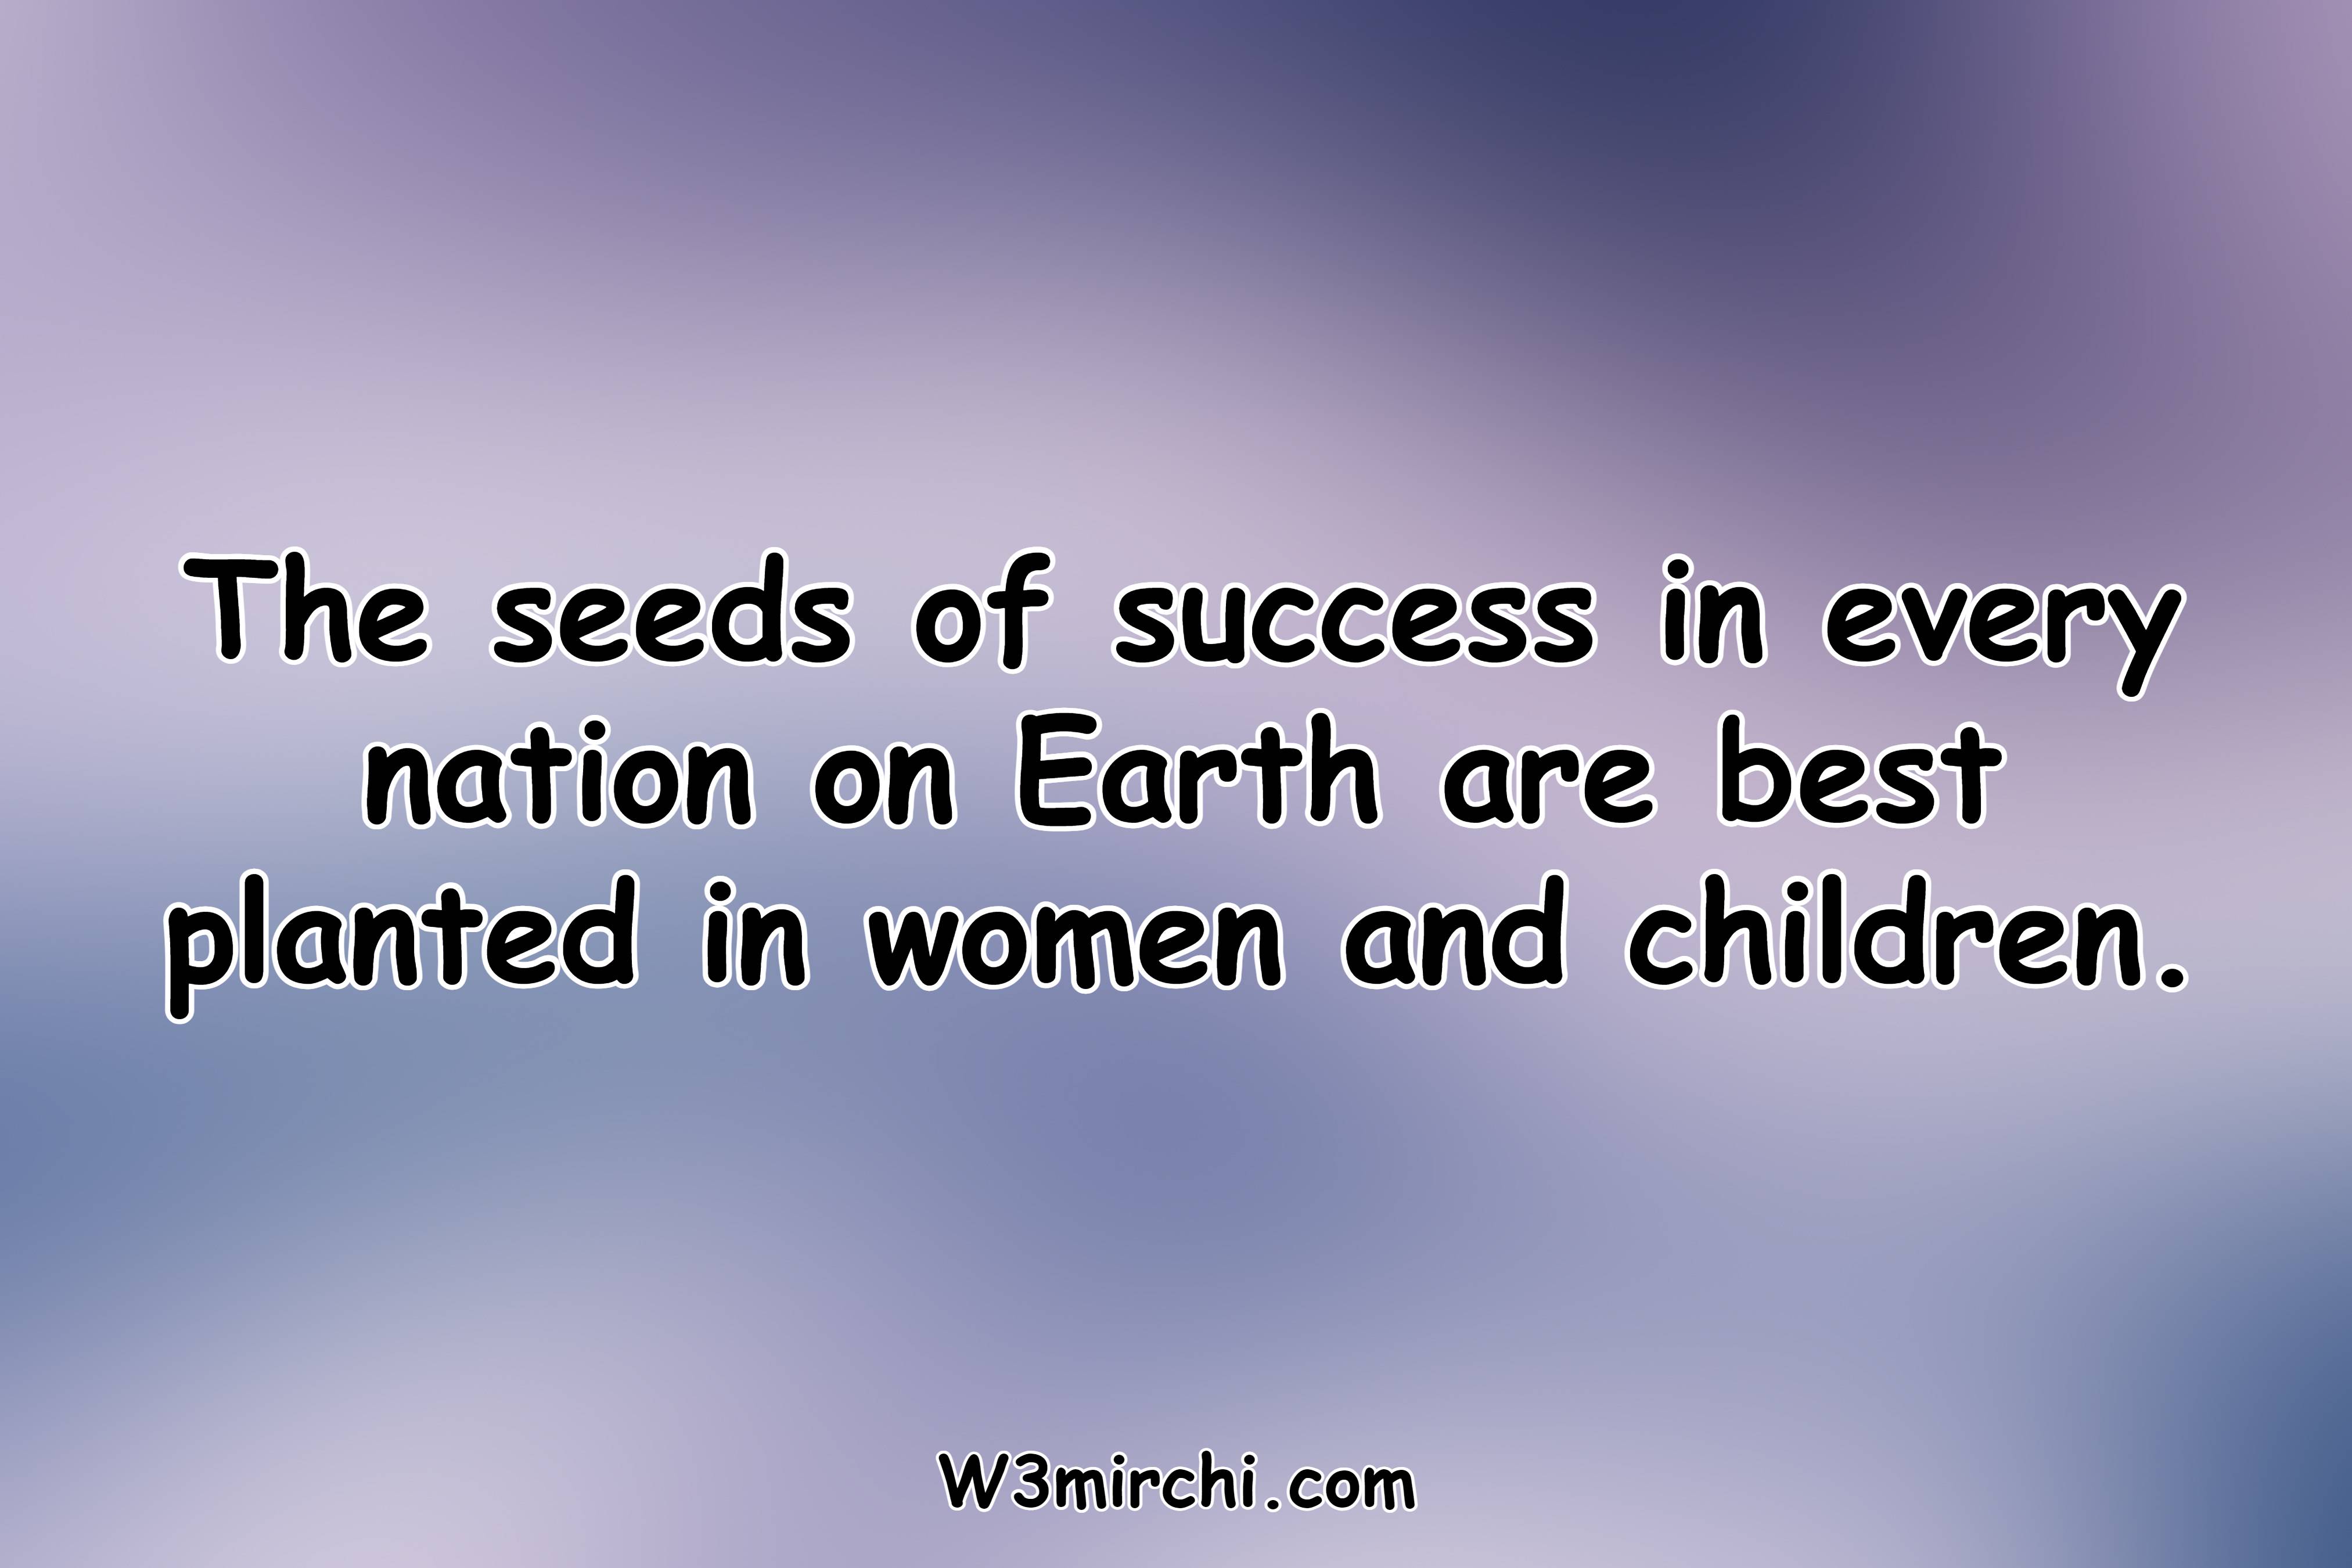 The seeds of success in every nation on